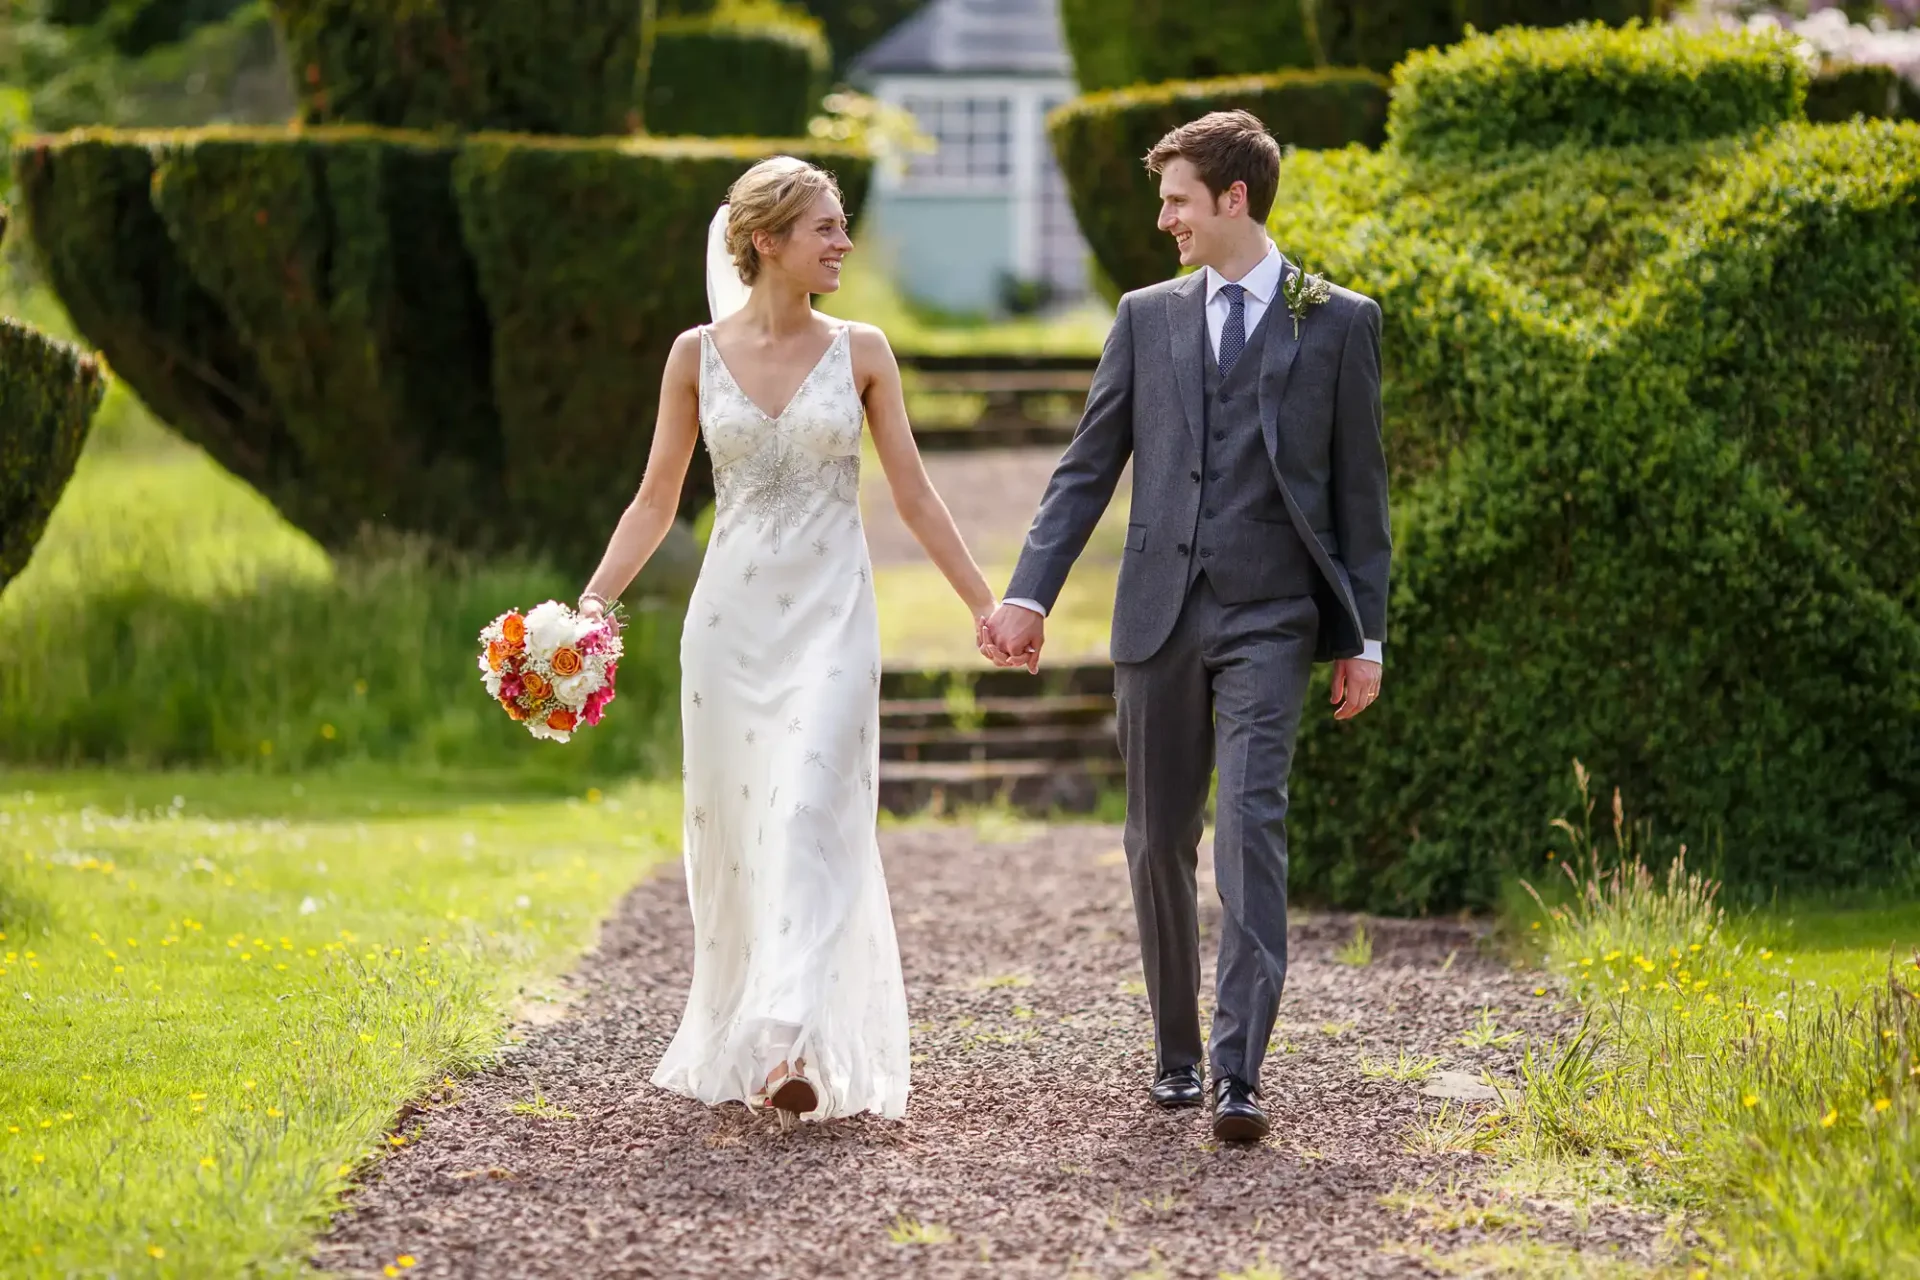 A bride and groom walking hand in hand along a garden path, smiling and looking at each other, with the bride holding a bouquet.